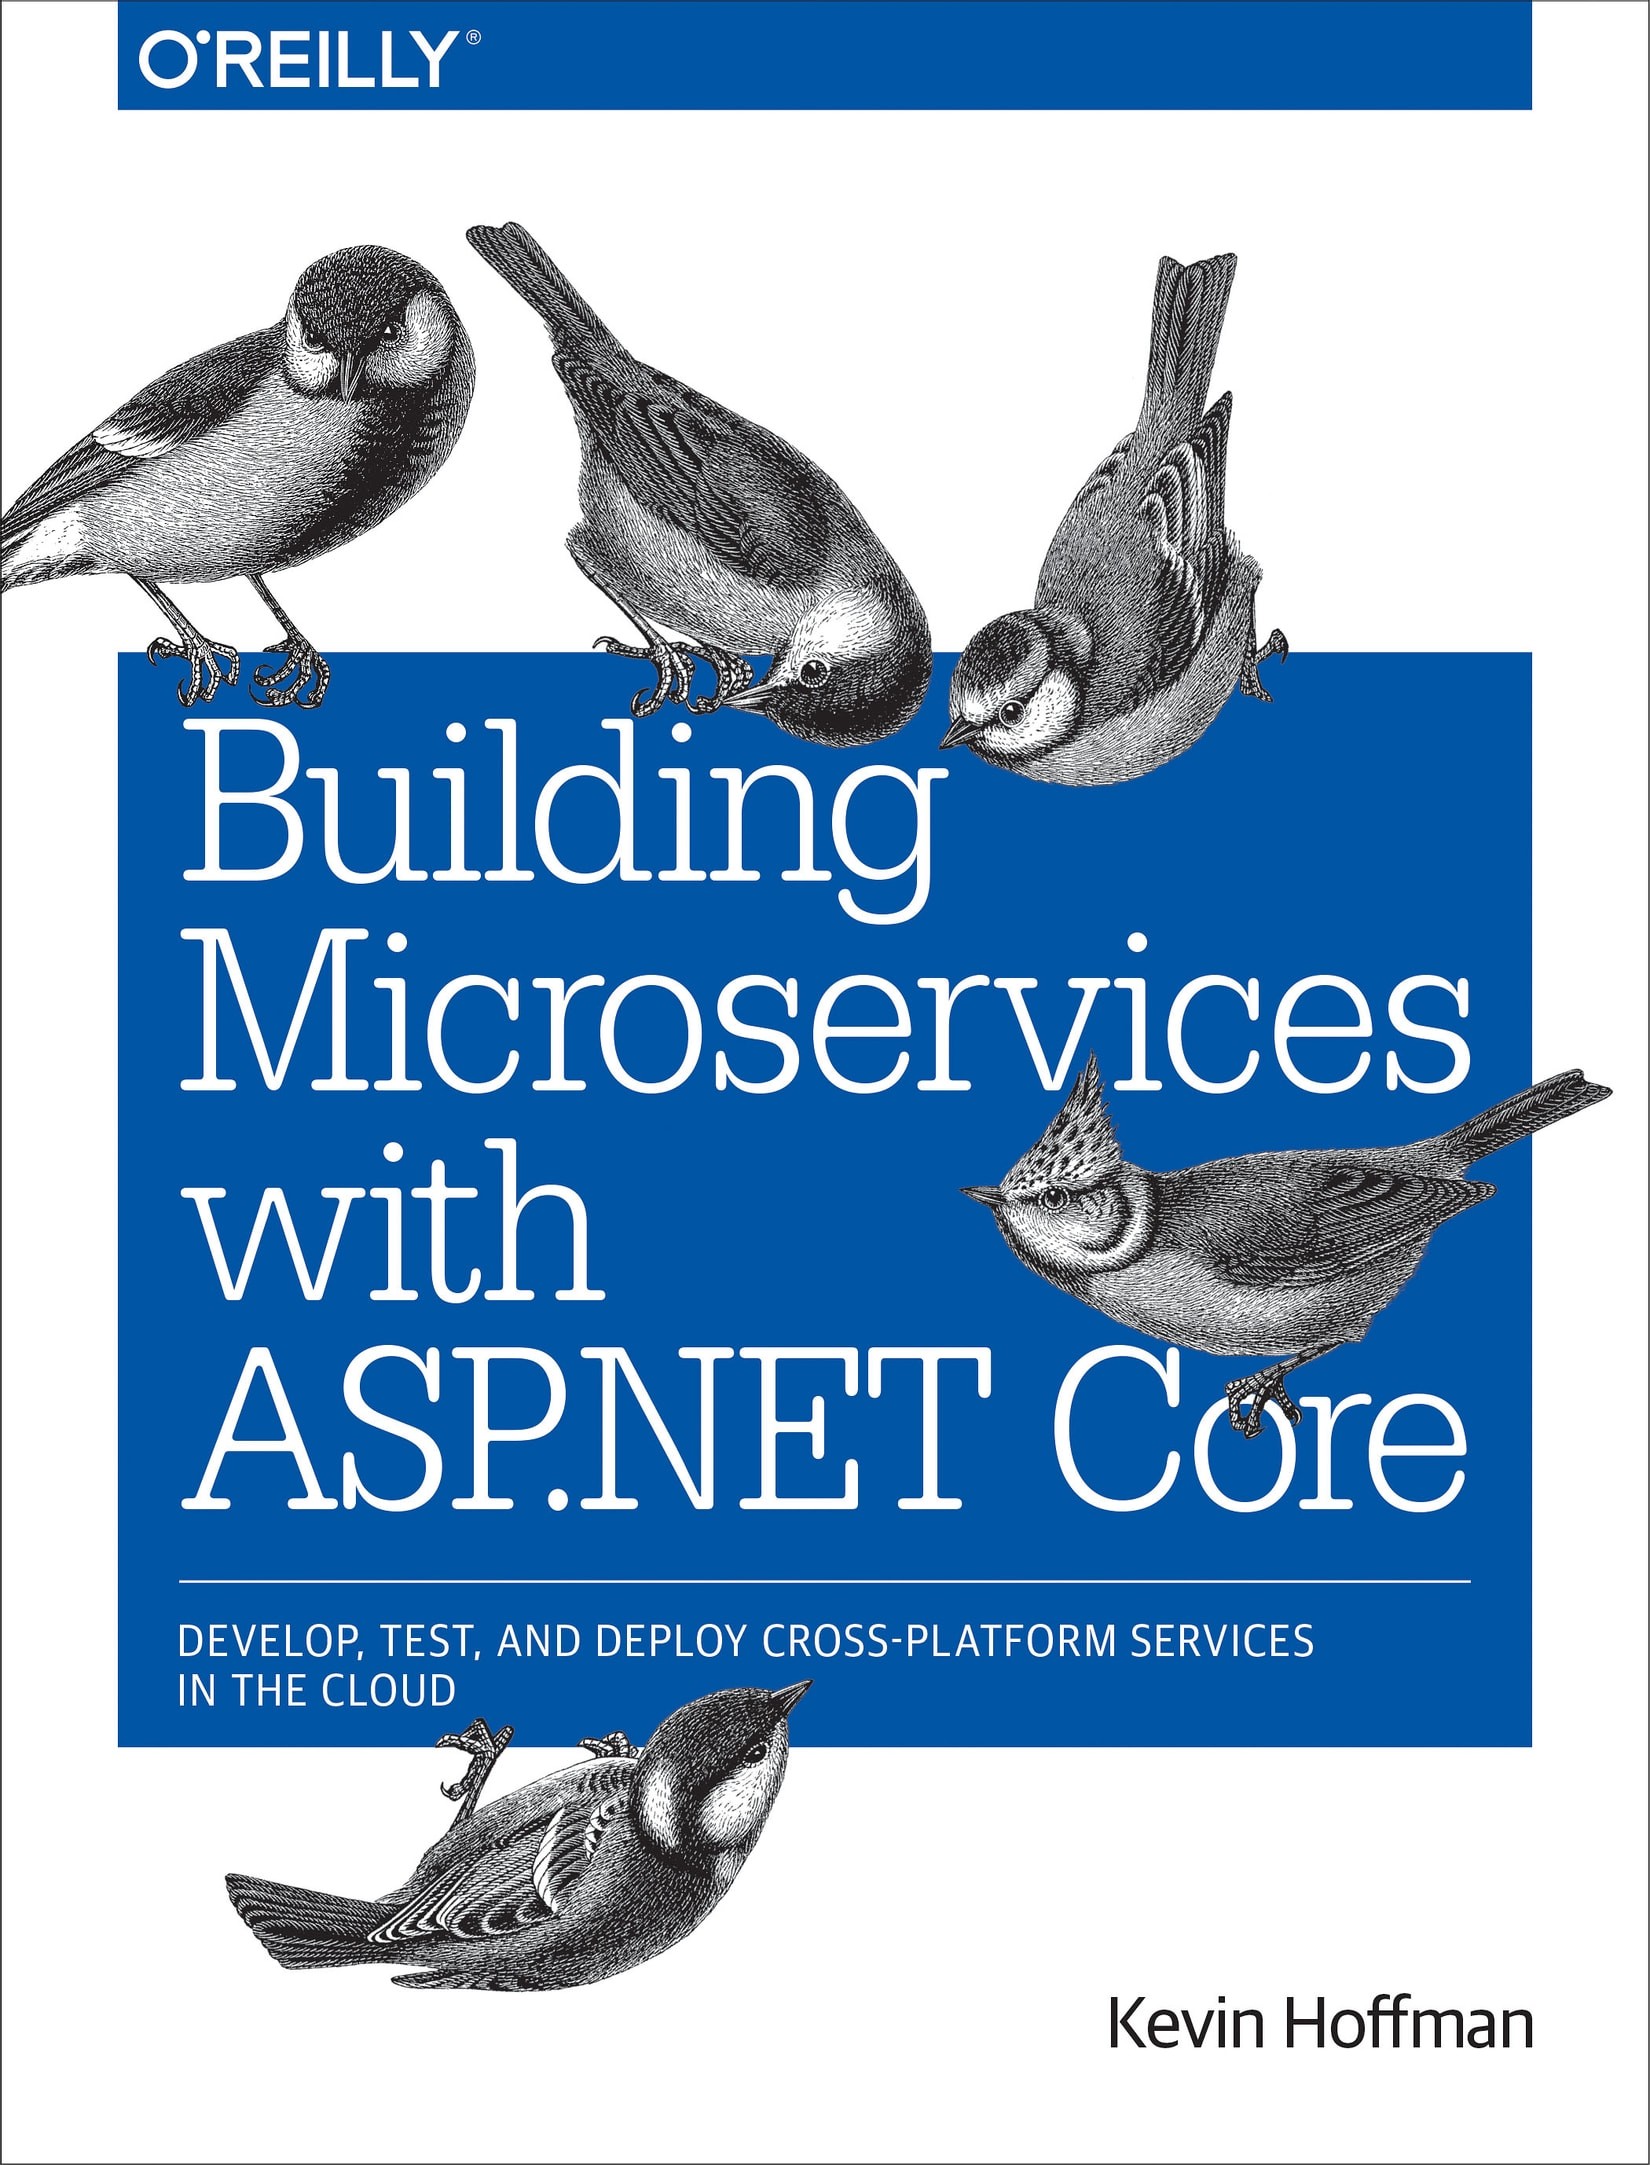 Building Microservices With Asp.net Core: Develop, Test, and Deploy Cross-Platform Services in the Cloud